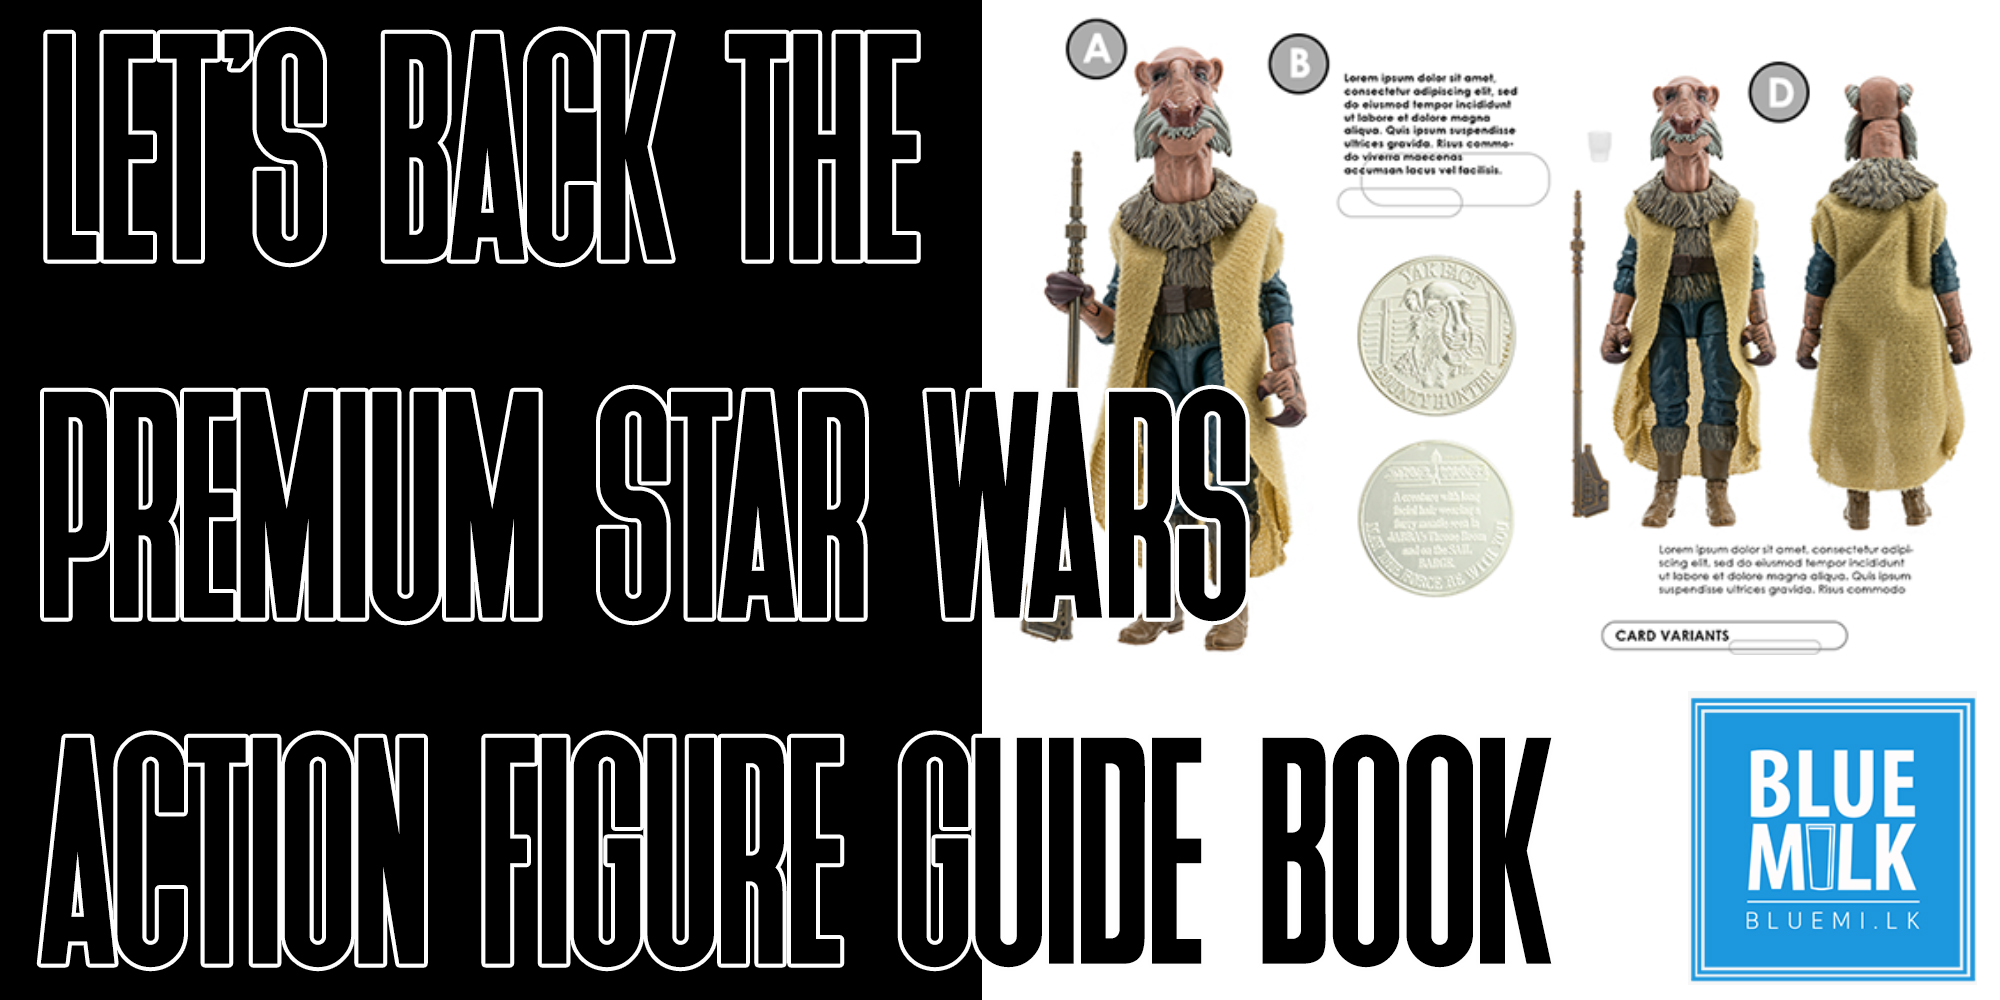 Former Toy Industry Professionals Form Media Company; Announce Premium Star Wars Action Figure Guide